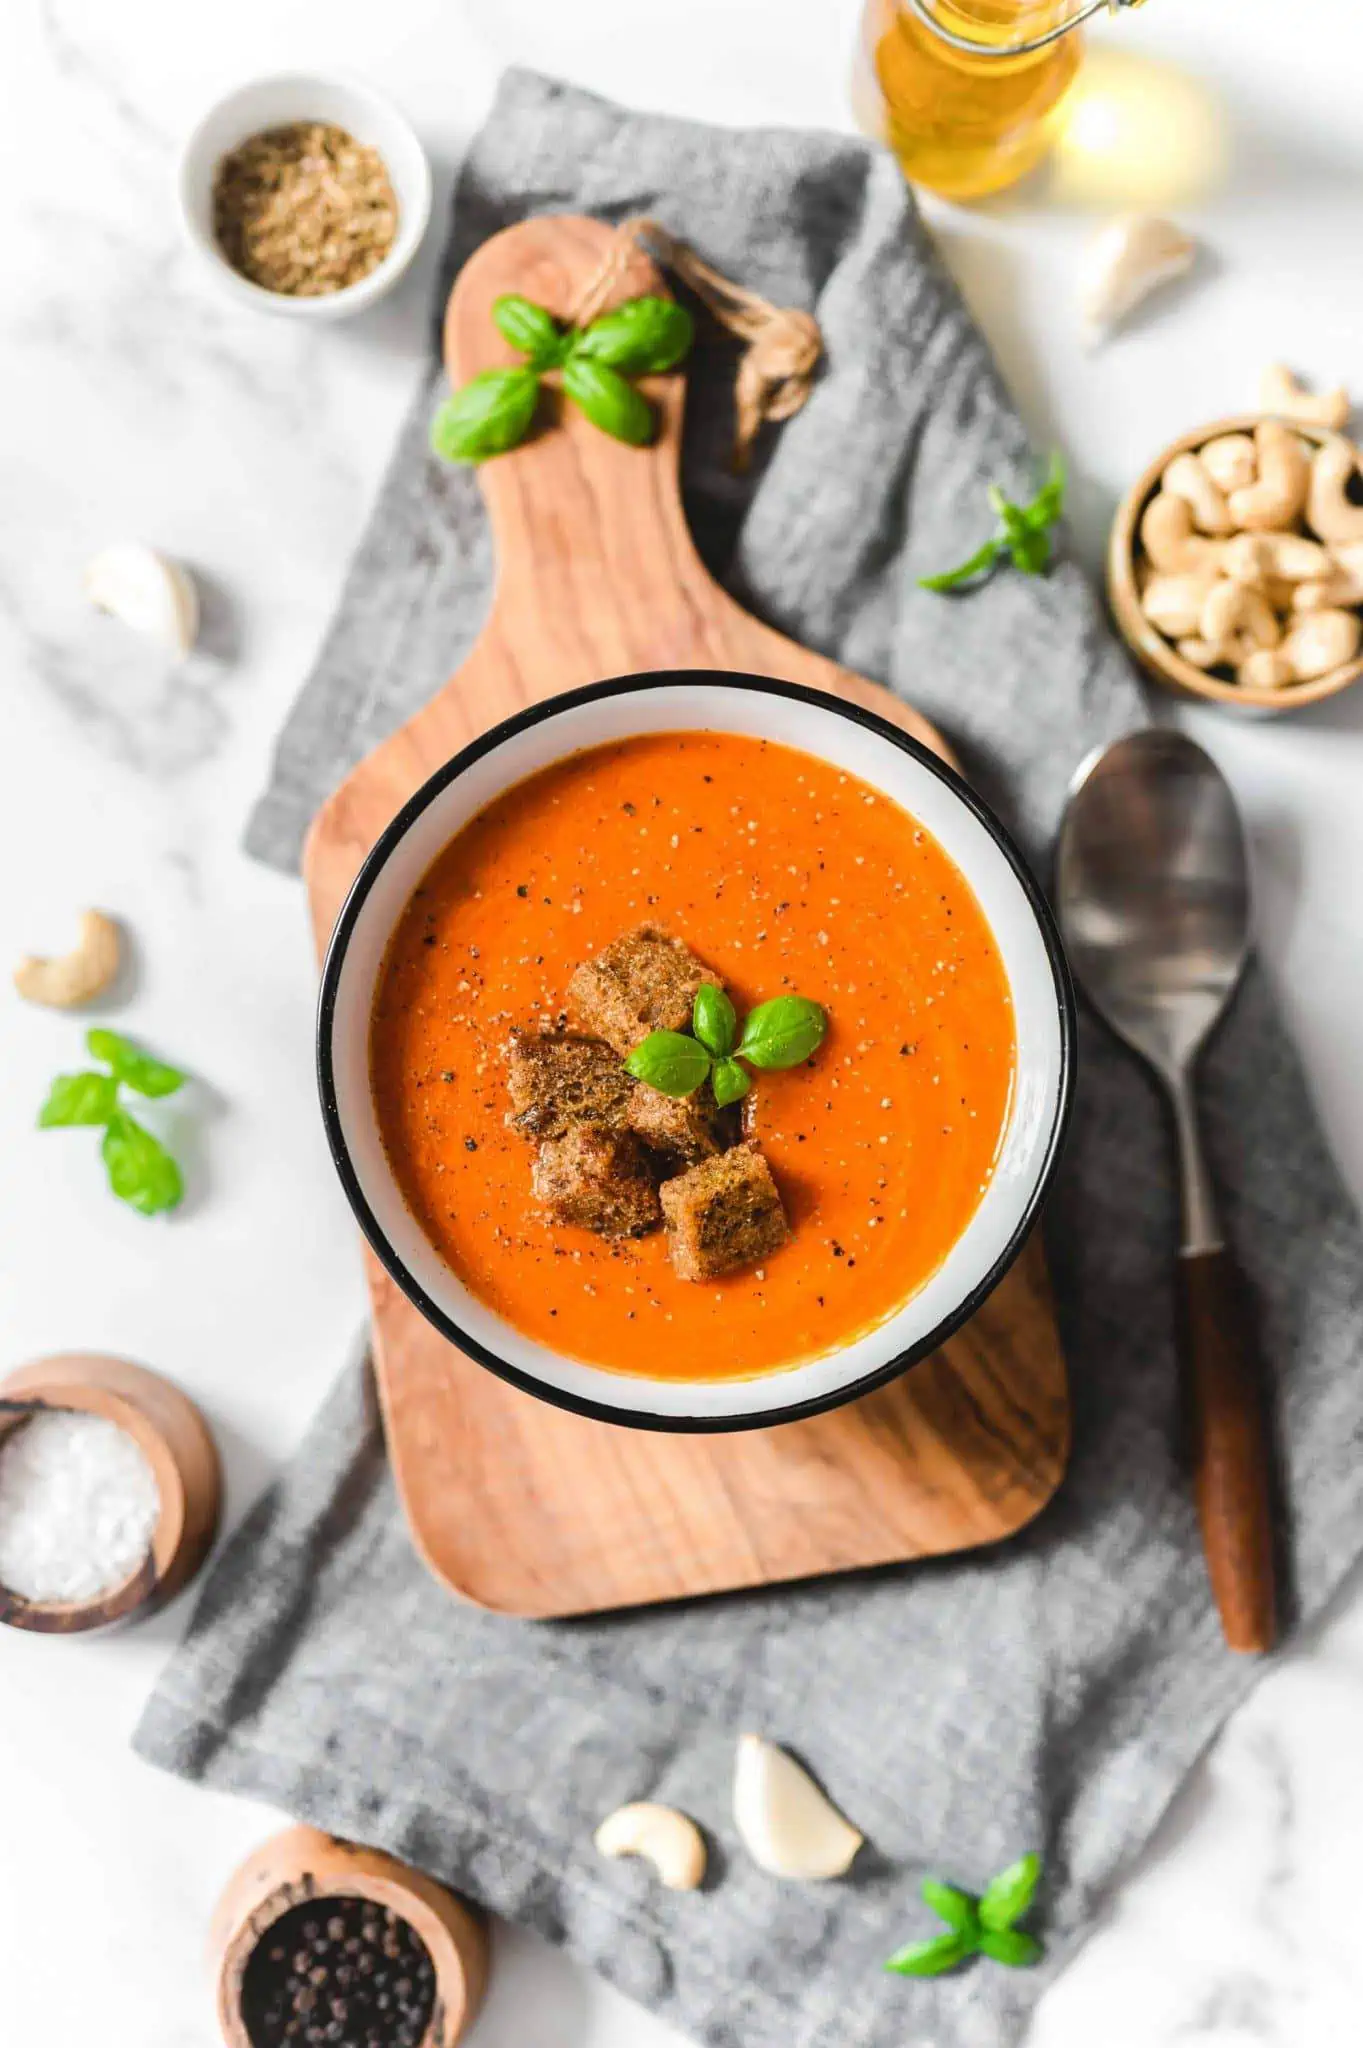 Creamy tomato soup from canned tomatoes in a bowl, topped with croutons and surrounded by ingredients.